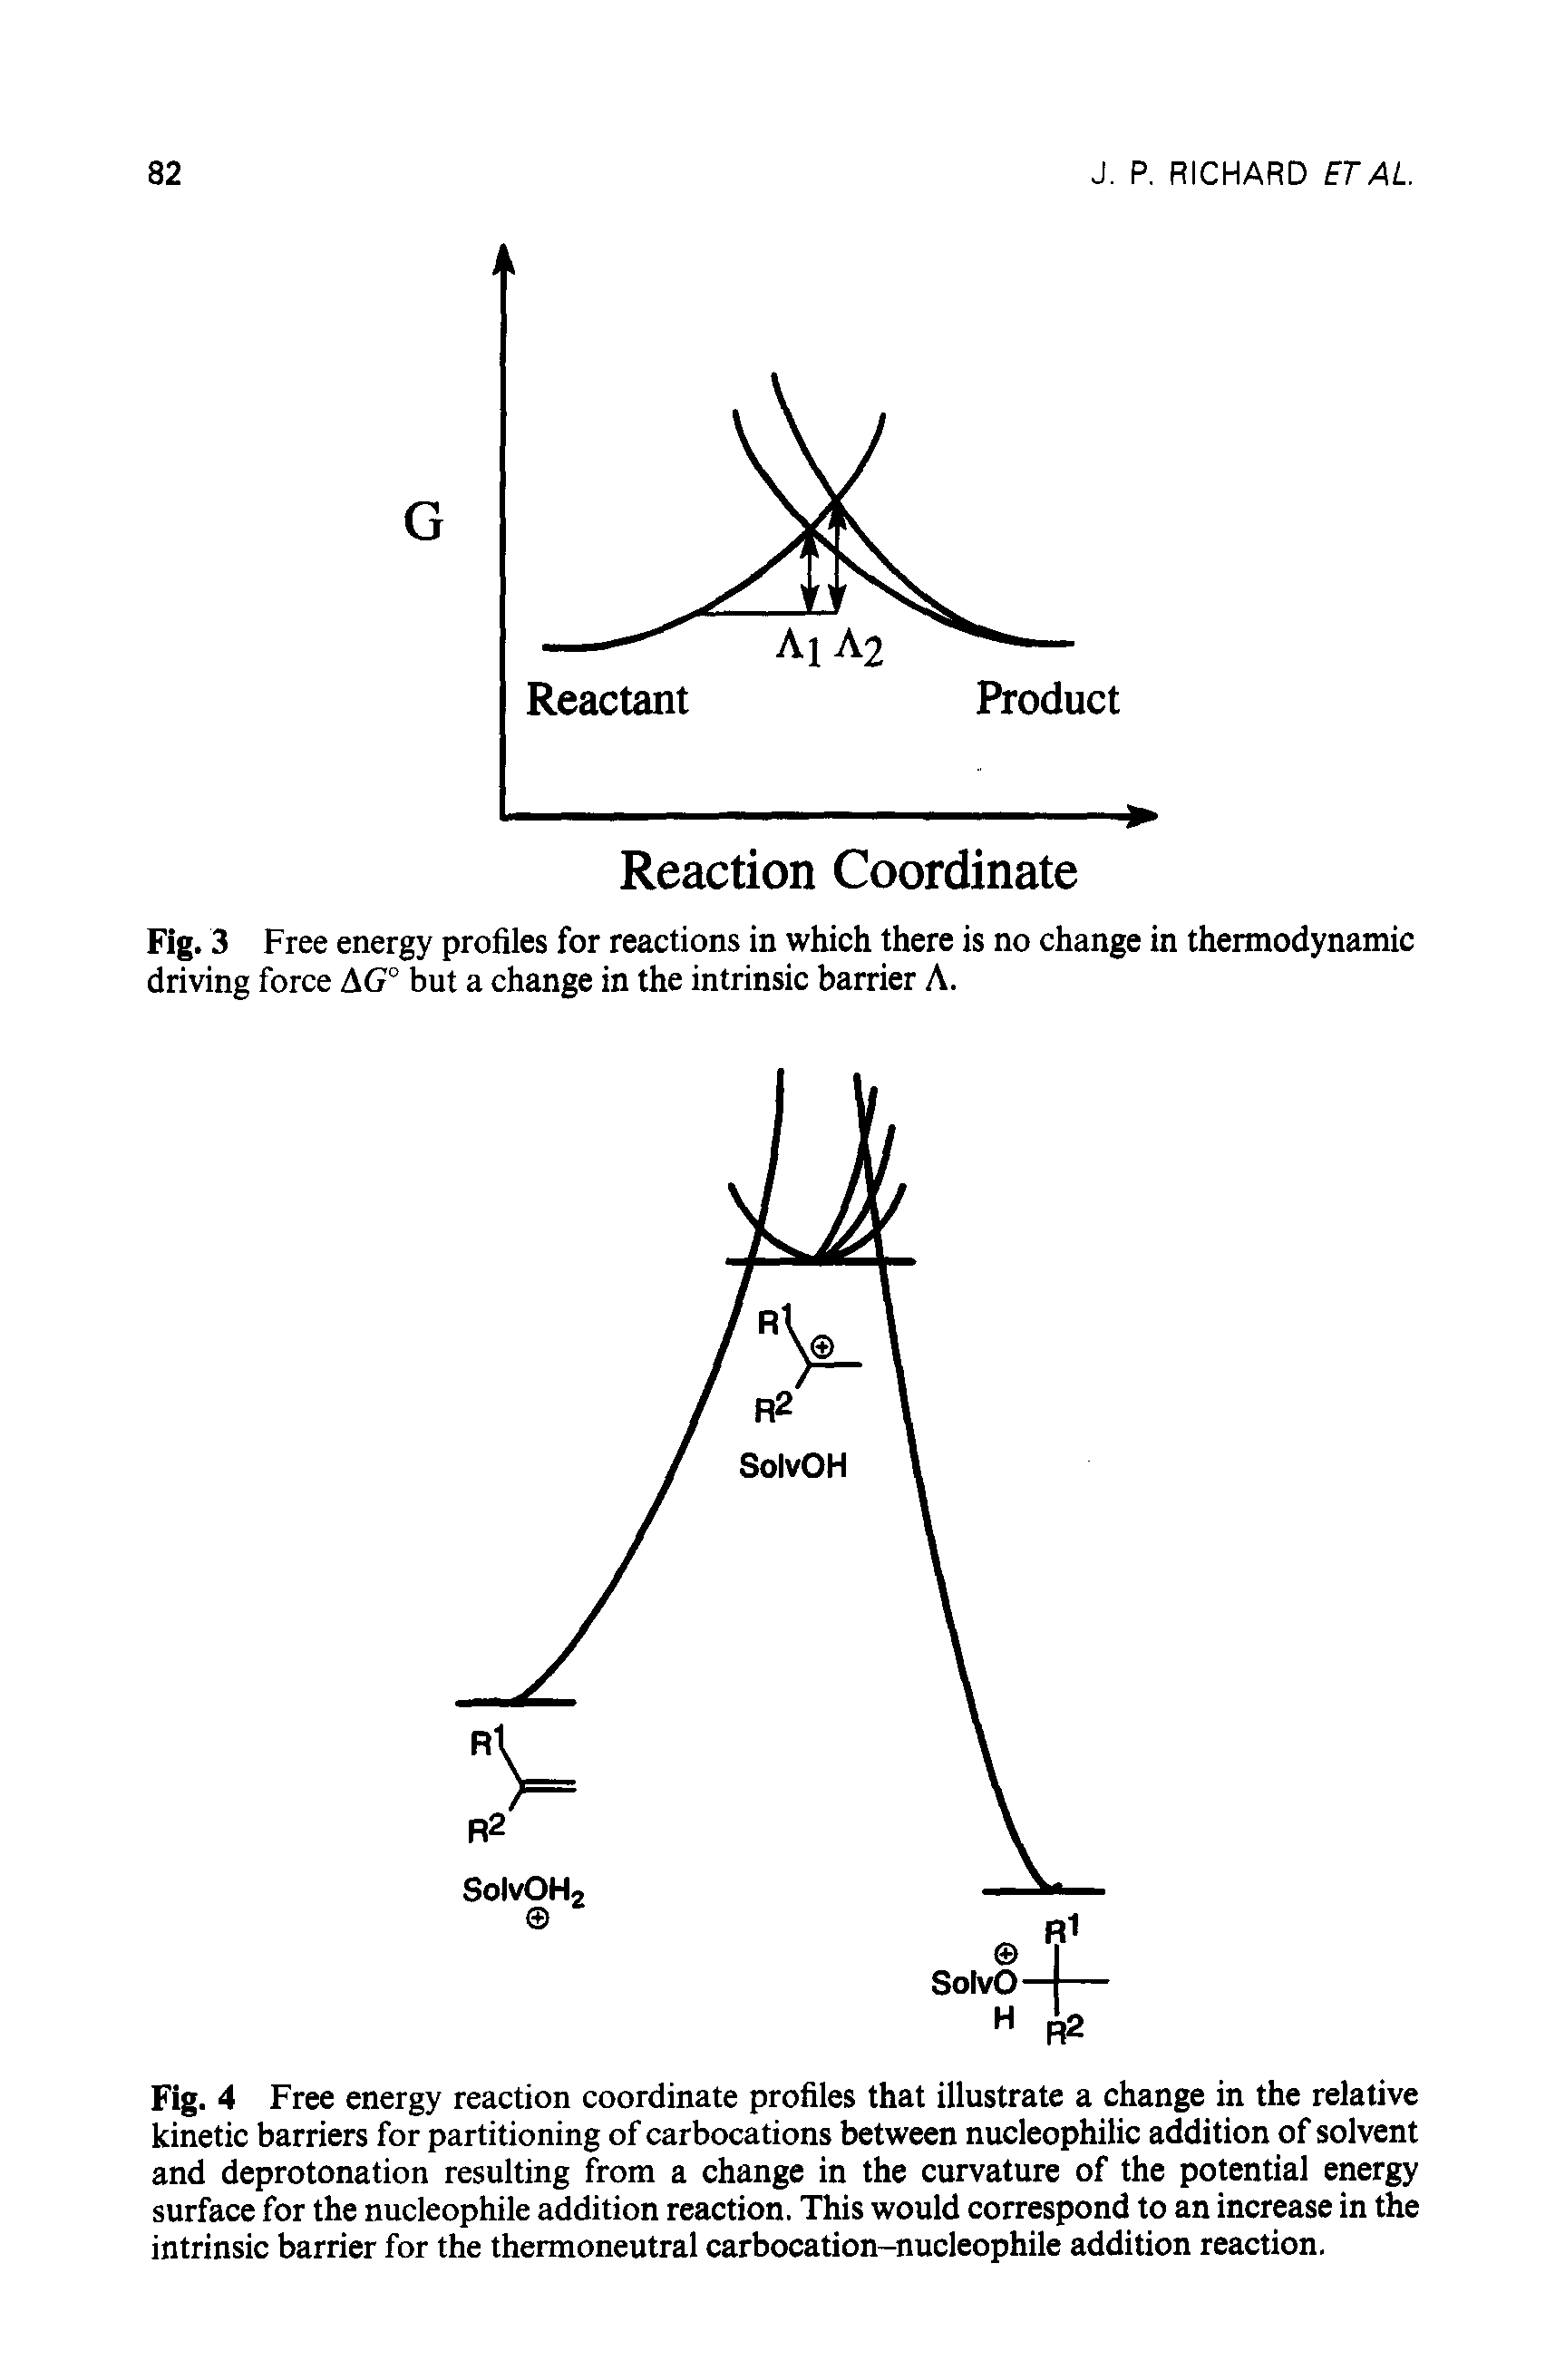 Fig. 4 Free energy reaction coordinate profiles that illustrate a change in the relative kinetic barriers for partitioning of carbocations between nucleophilic addition of solvent and deprotonation resulting from a change in the curvature of the potential energy surface for the nucleophile addition reaction. This would correspond to an increase in the intrinsic barrier for the thermoneutral carbocation-nucleophile addition reaction.